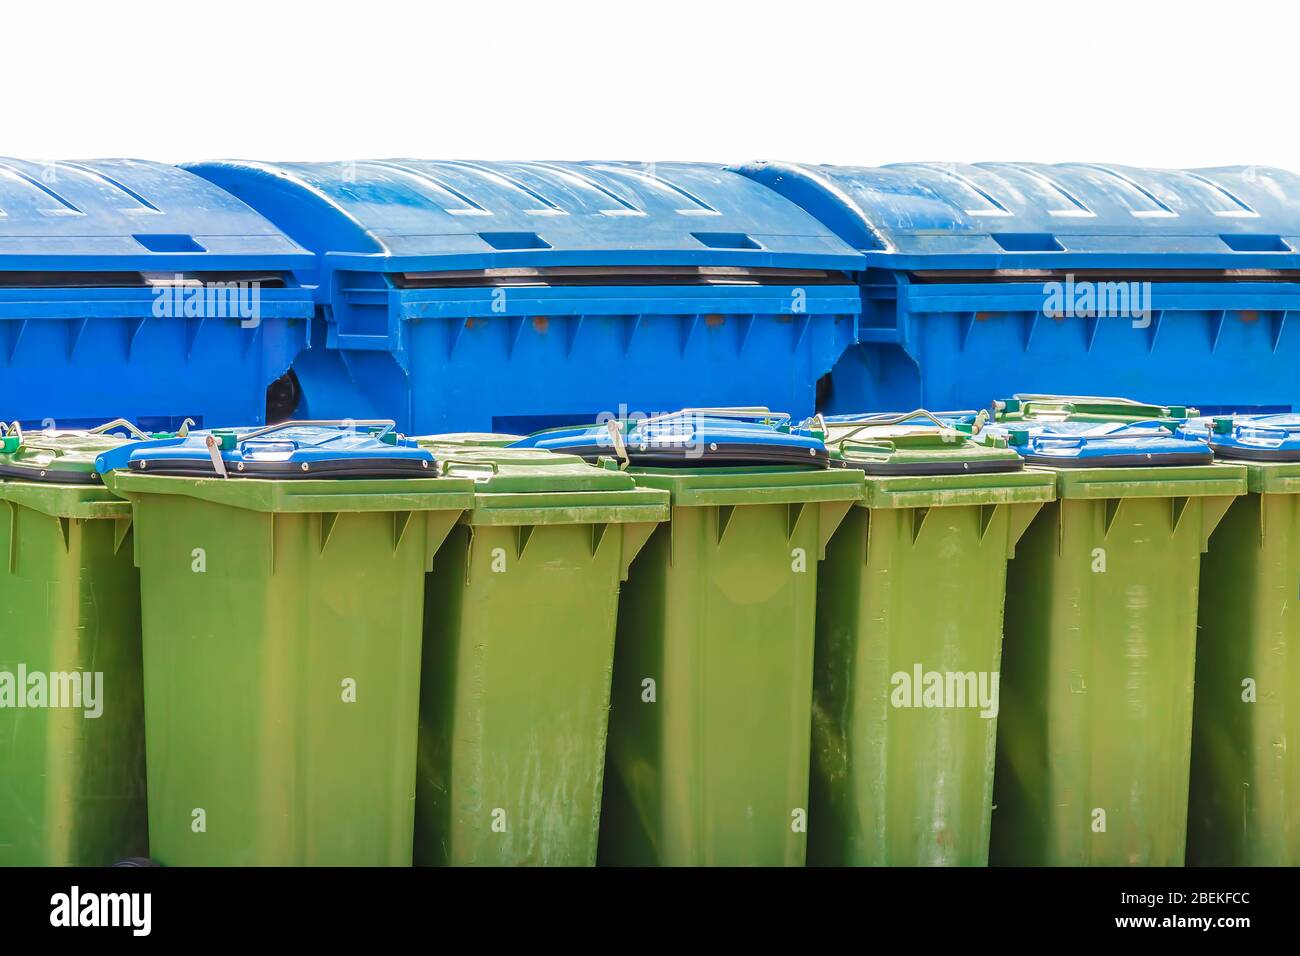 https://c8.alamy.com/comp/2BEKFCC/large-blue-and-small-green-waste-containers-isolated-on-a-white-background-2BEKFCC.jpg